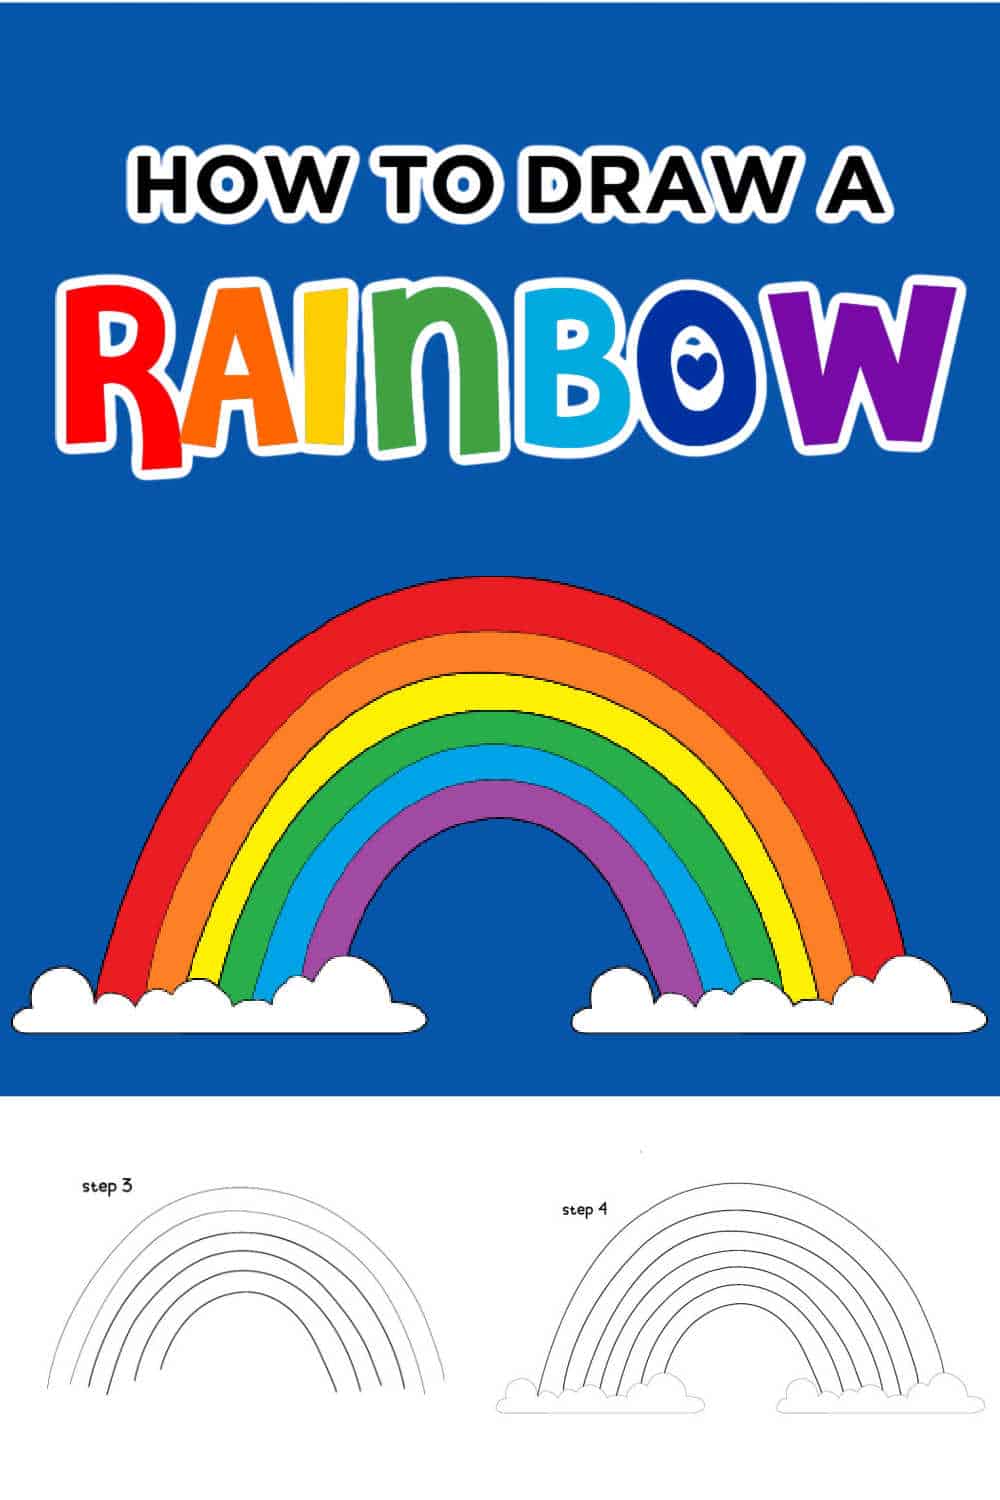 How to Draw and Paint a Rainbow with Watercolors (Easy!) - Arty Crafty Kids